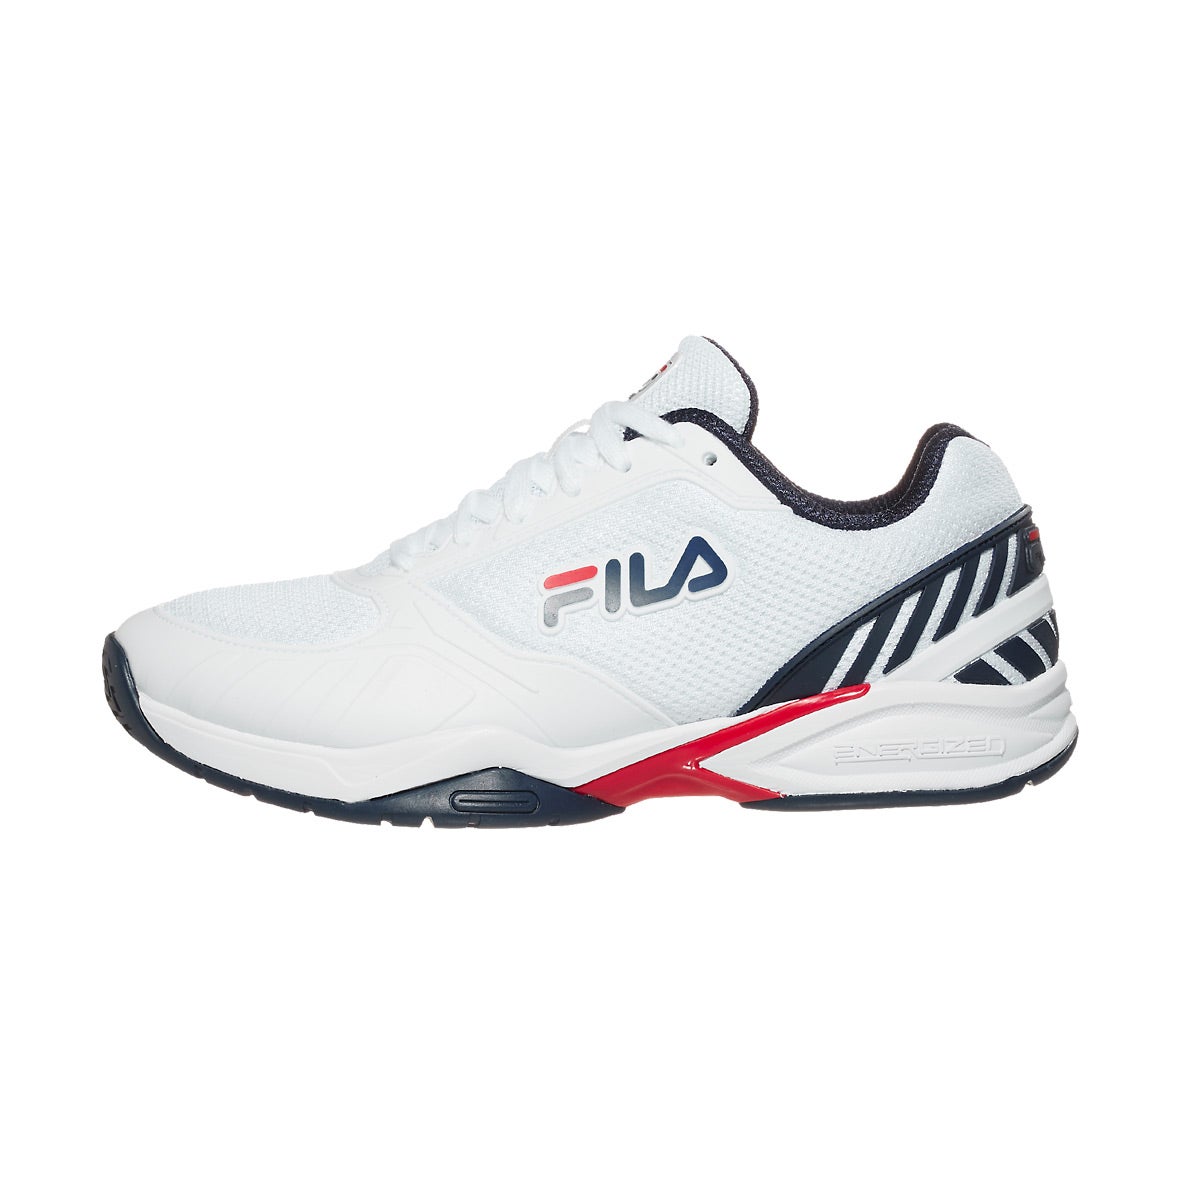 Fila Volley Zone Wh/Navy/Red Men's Pickleball Shoes 360° View - Tennis ...